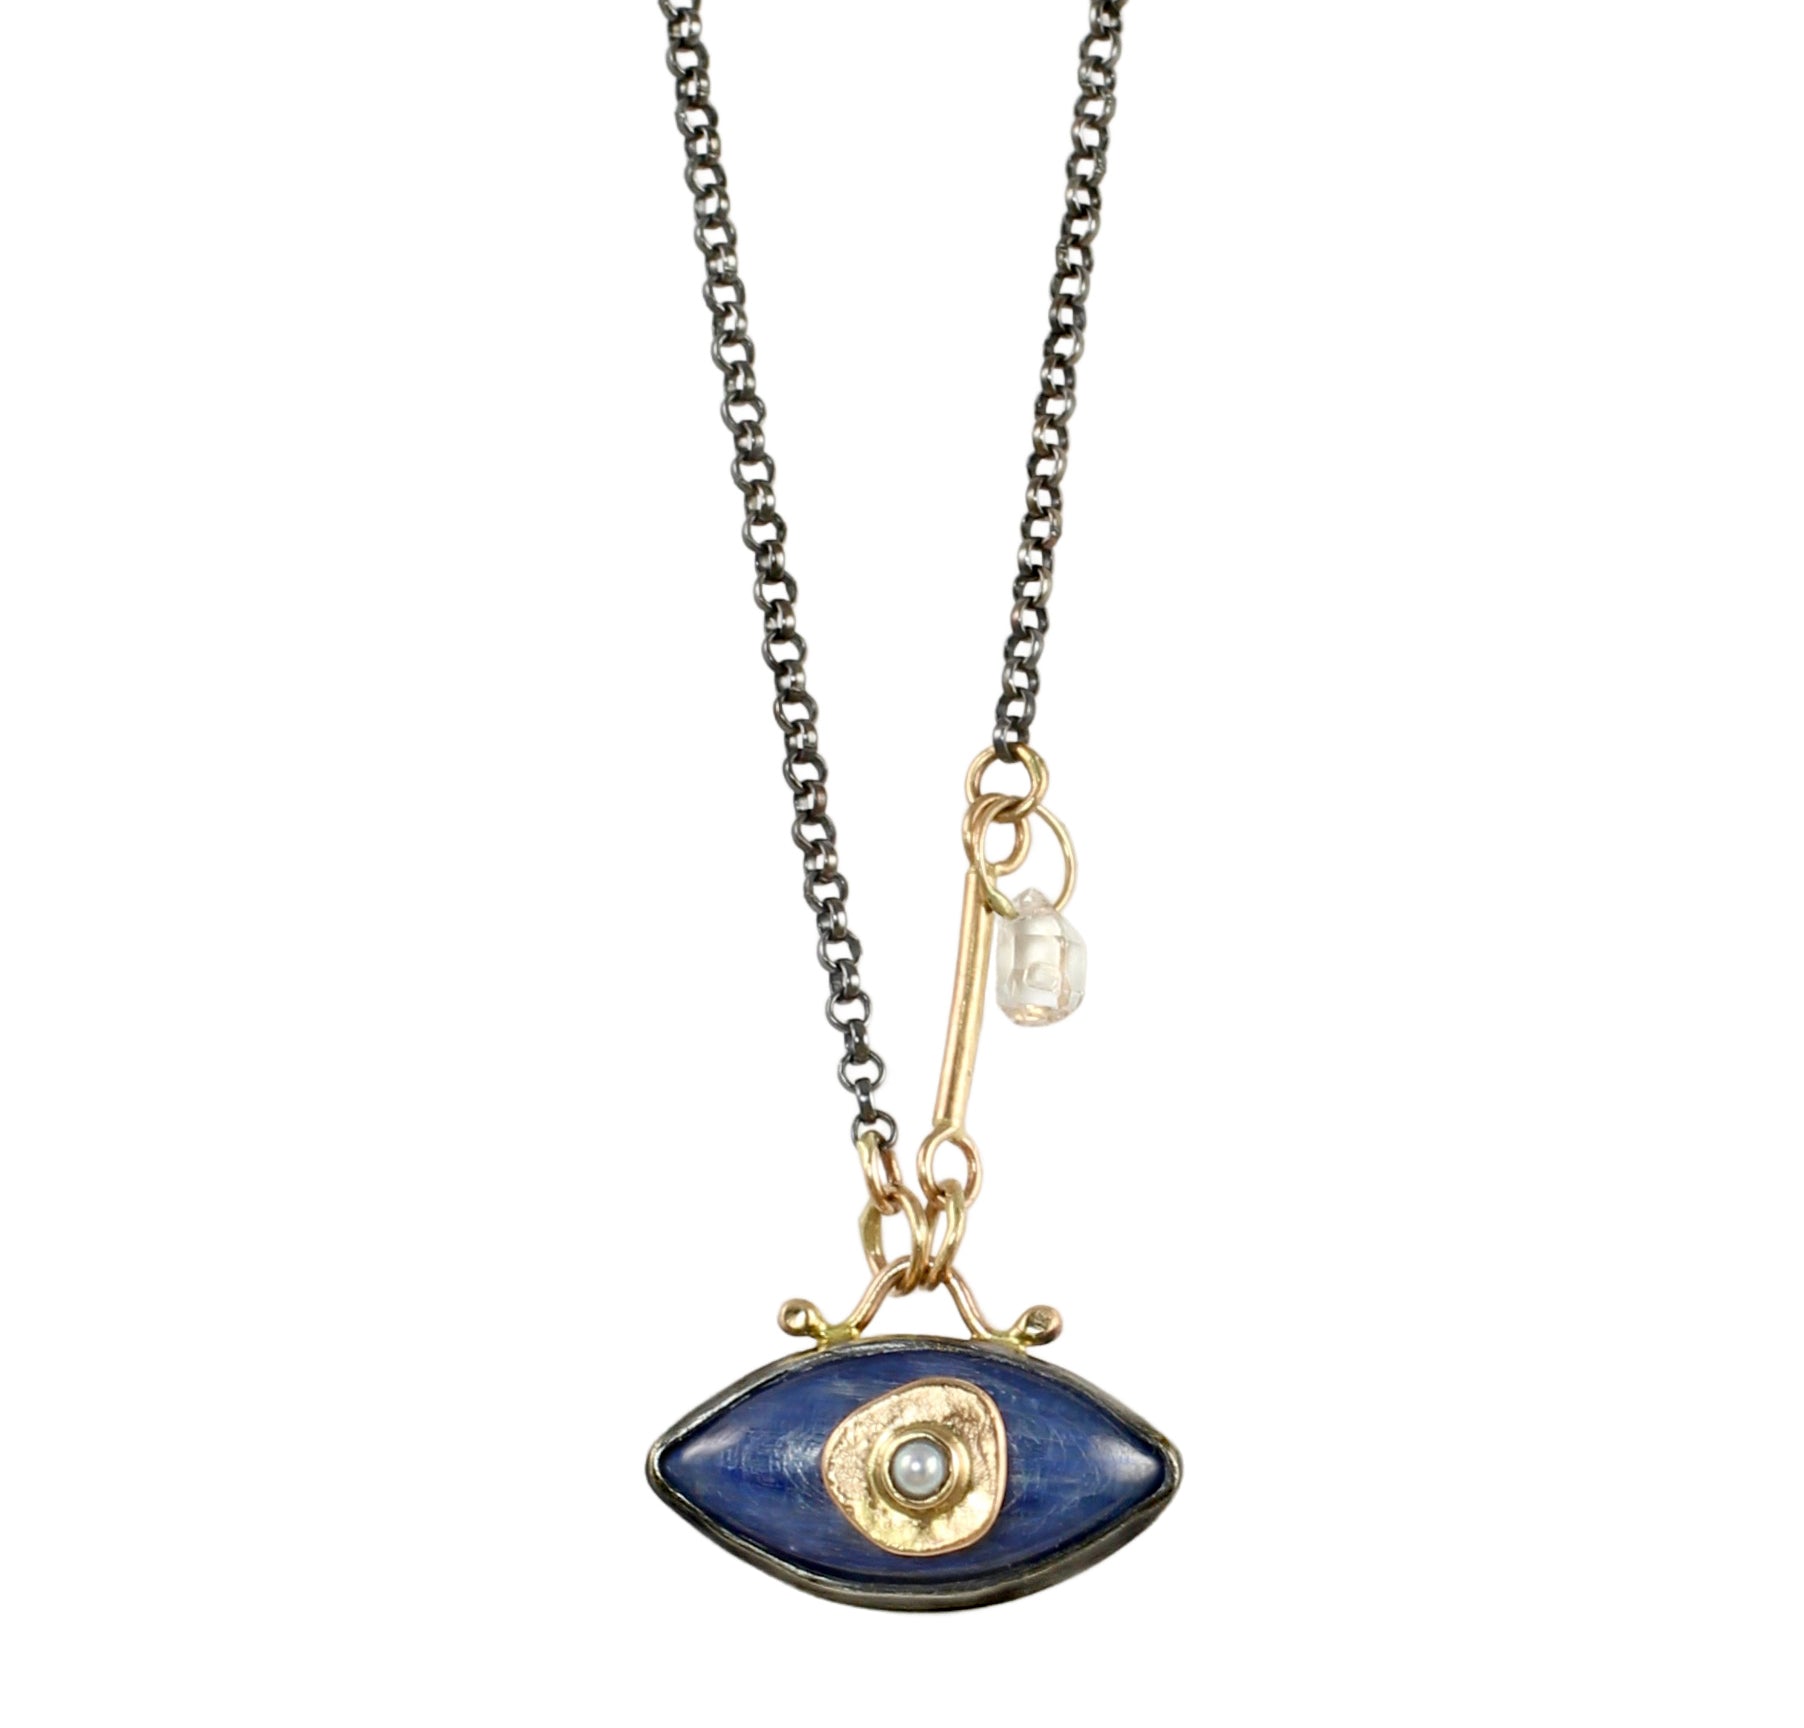 Kyanite & Pearl Protective Eye Necklace with 14k Gold